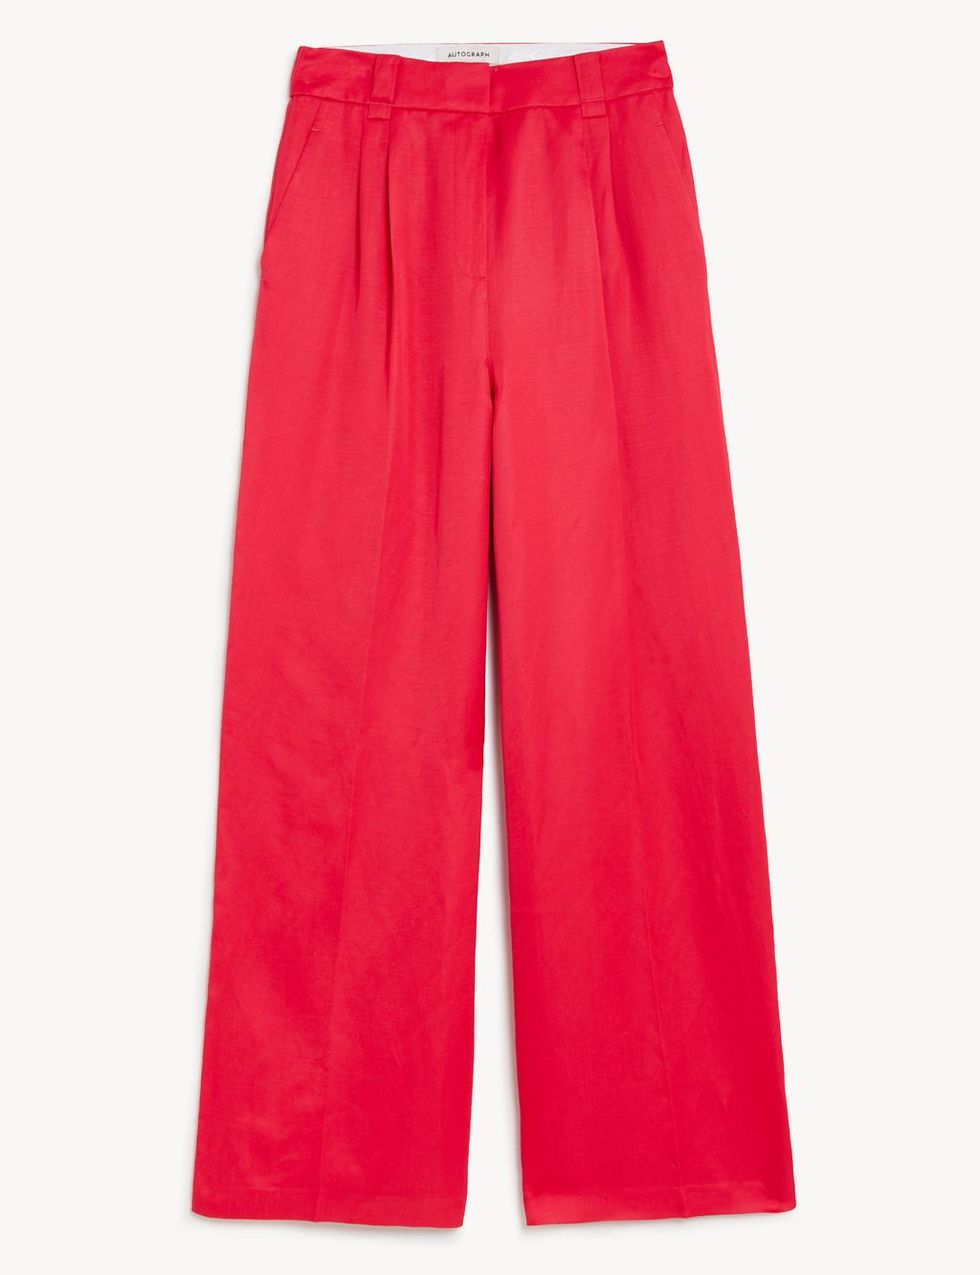 Marks & Spencer’s is selling chic wide-leg trousers